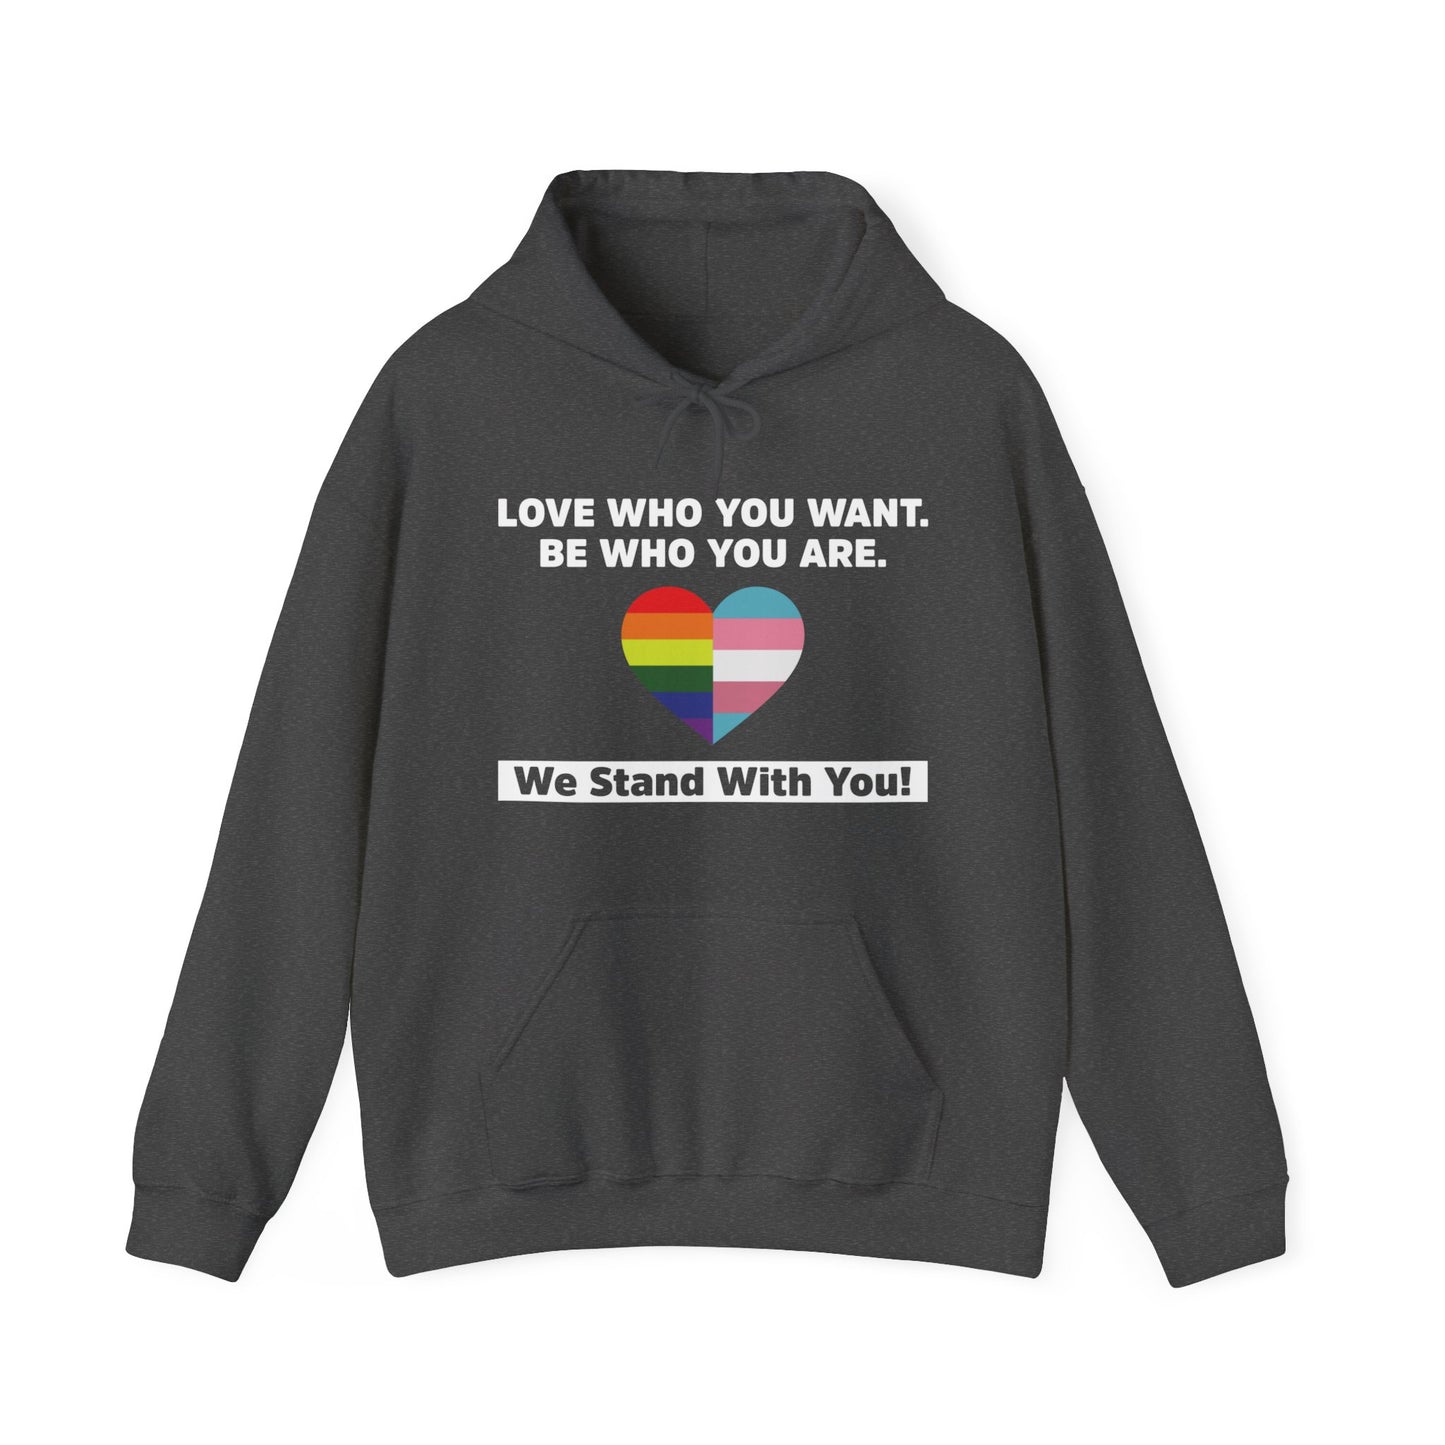 “Love Who You Want” Unisex Hoodie